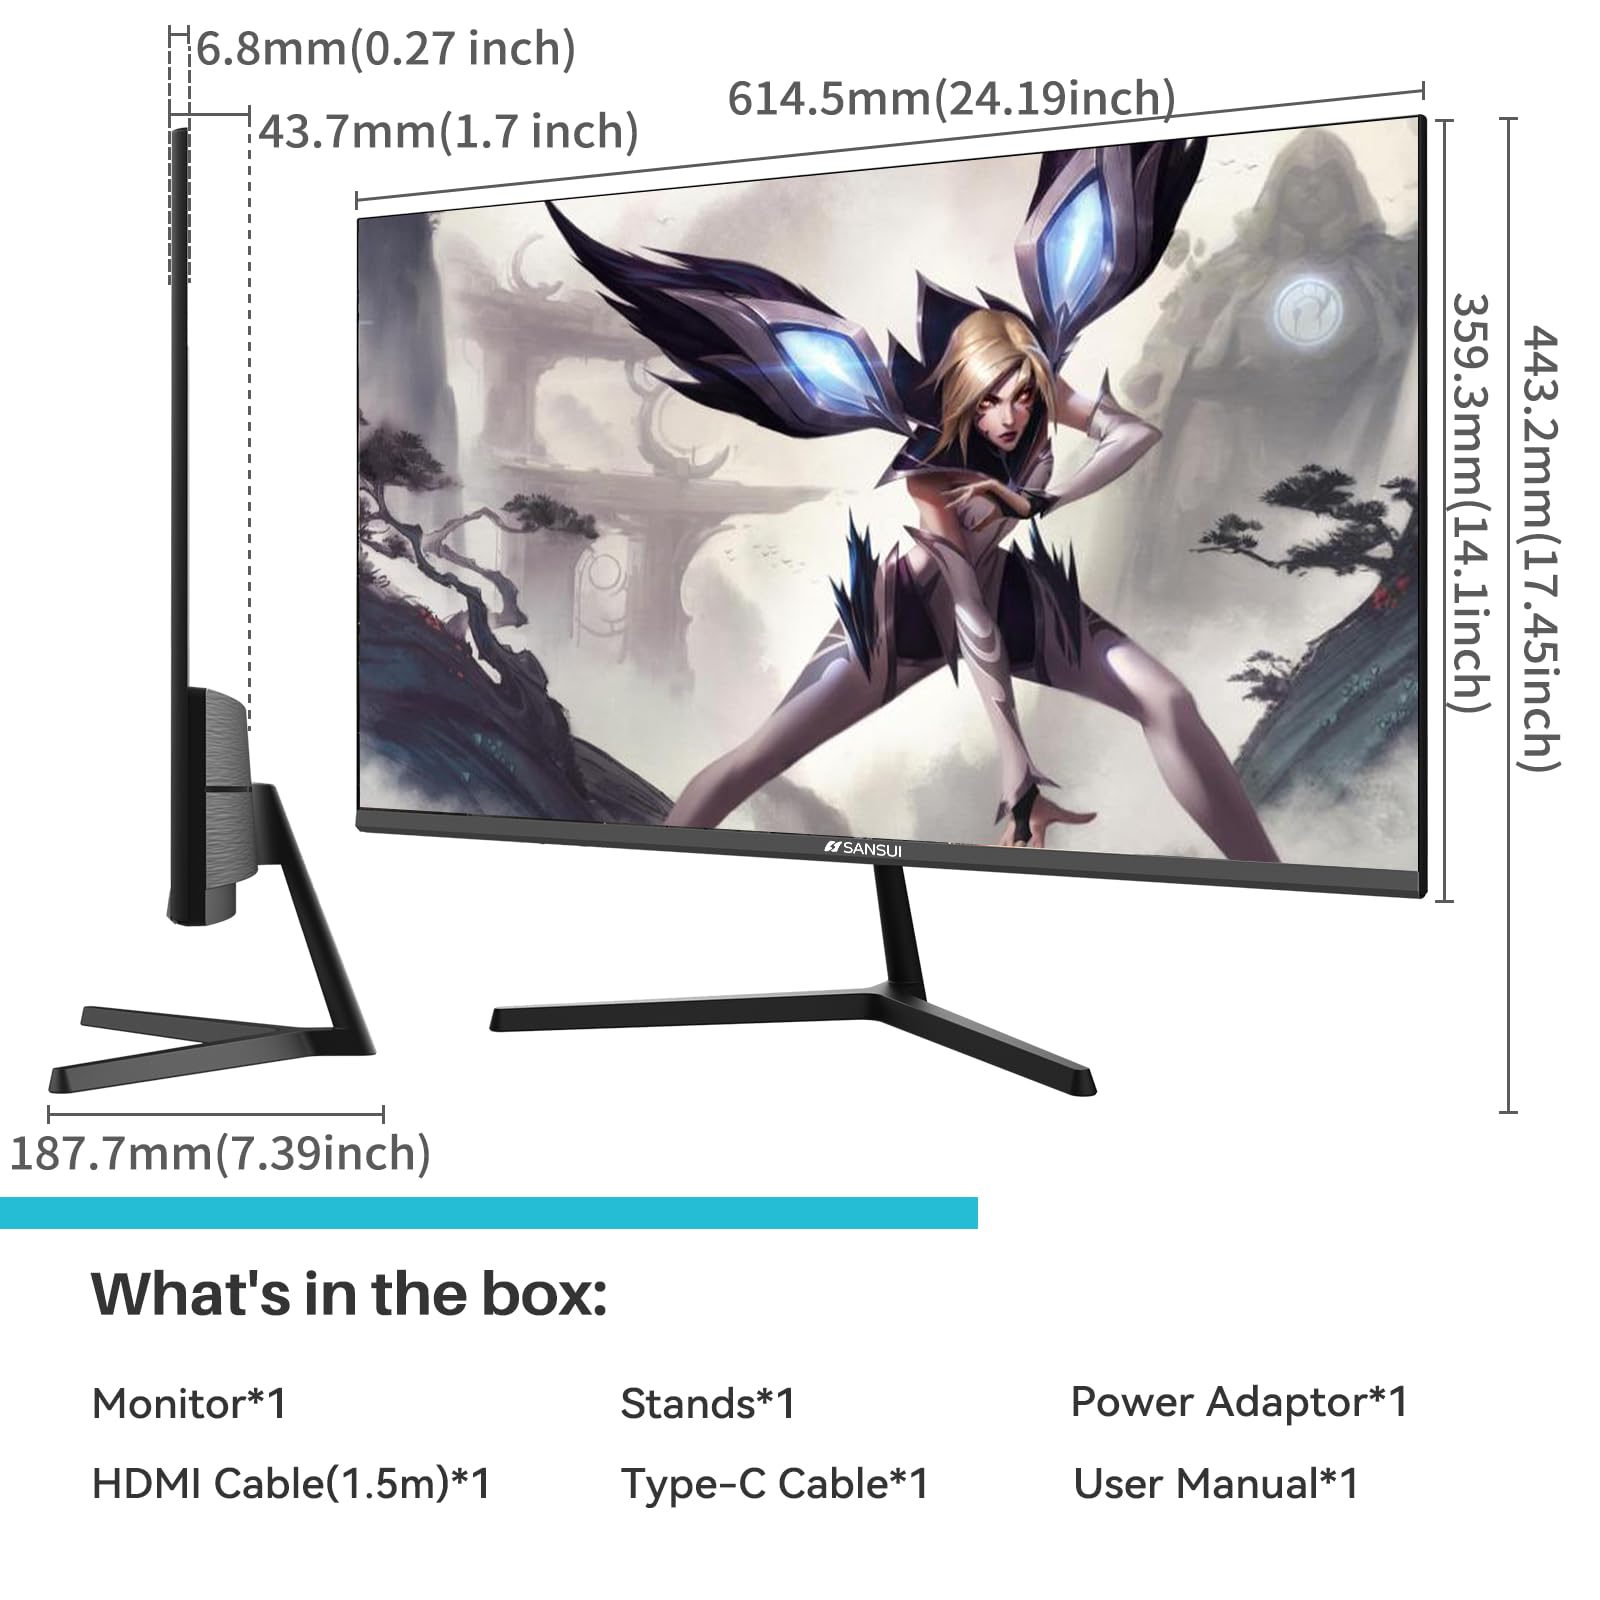 SANSUI Computer Monitors 27 inch 100Hz IPS USB Type-C FHD 1080P HDR10 Built-in Speakers HDMI DP Game RTS/FPS tilt Adjustable for Working and Gaming (ES-27X3 Type-C Cable & HDMI Cable Included)